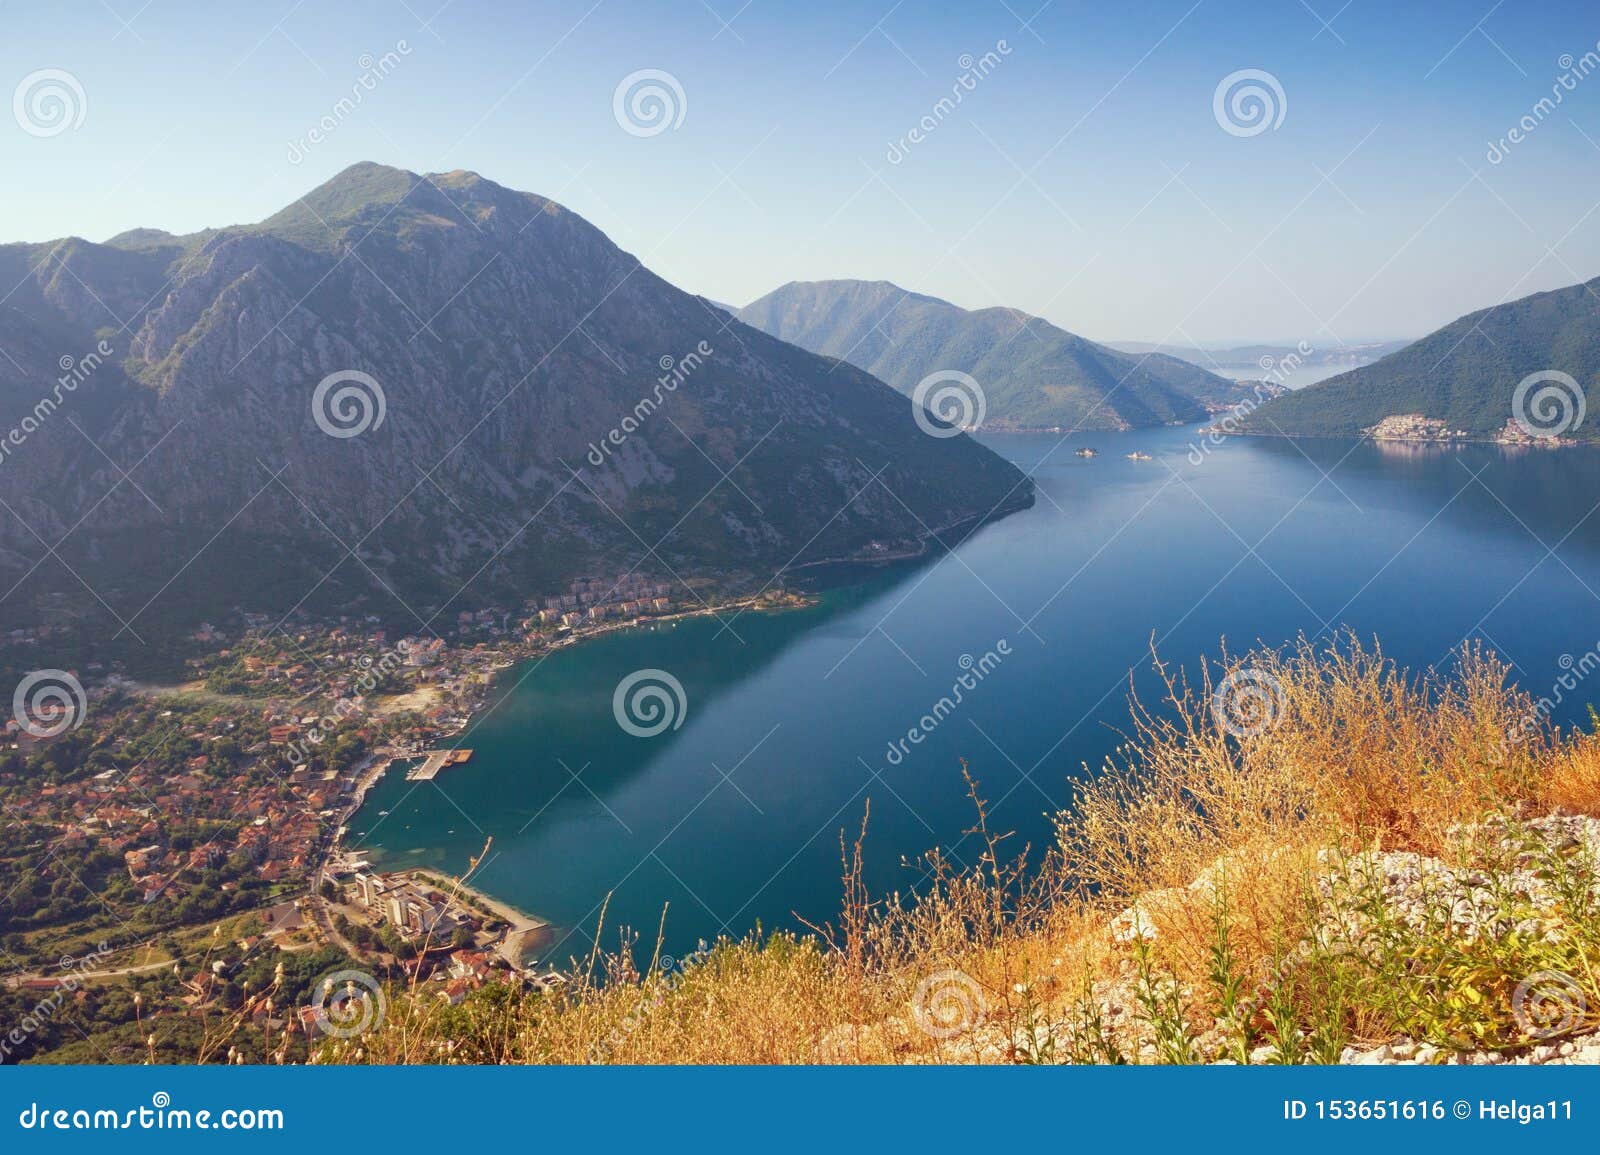 beautiful summer mediterranean landscape. montenegro, view of kotor bay and risan town from a mountain slope